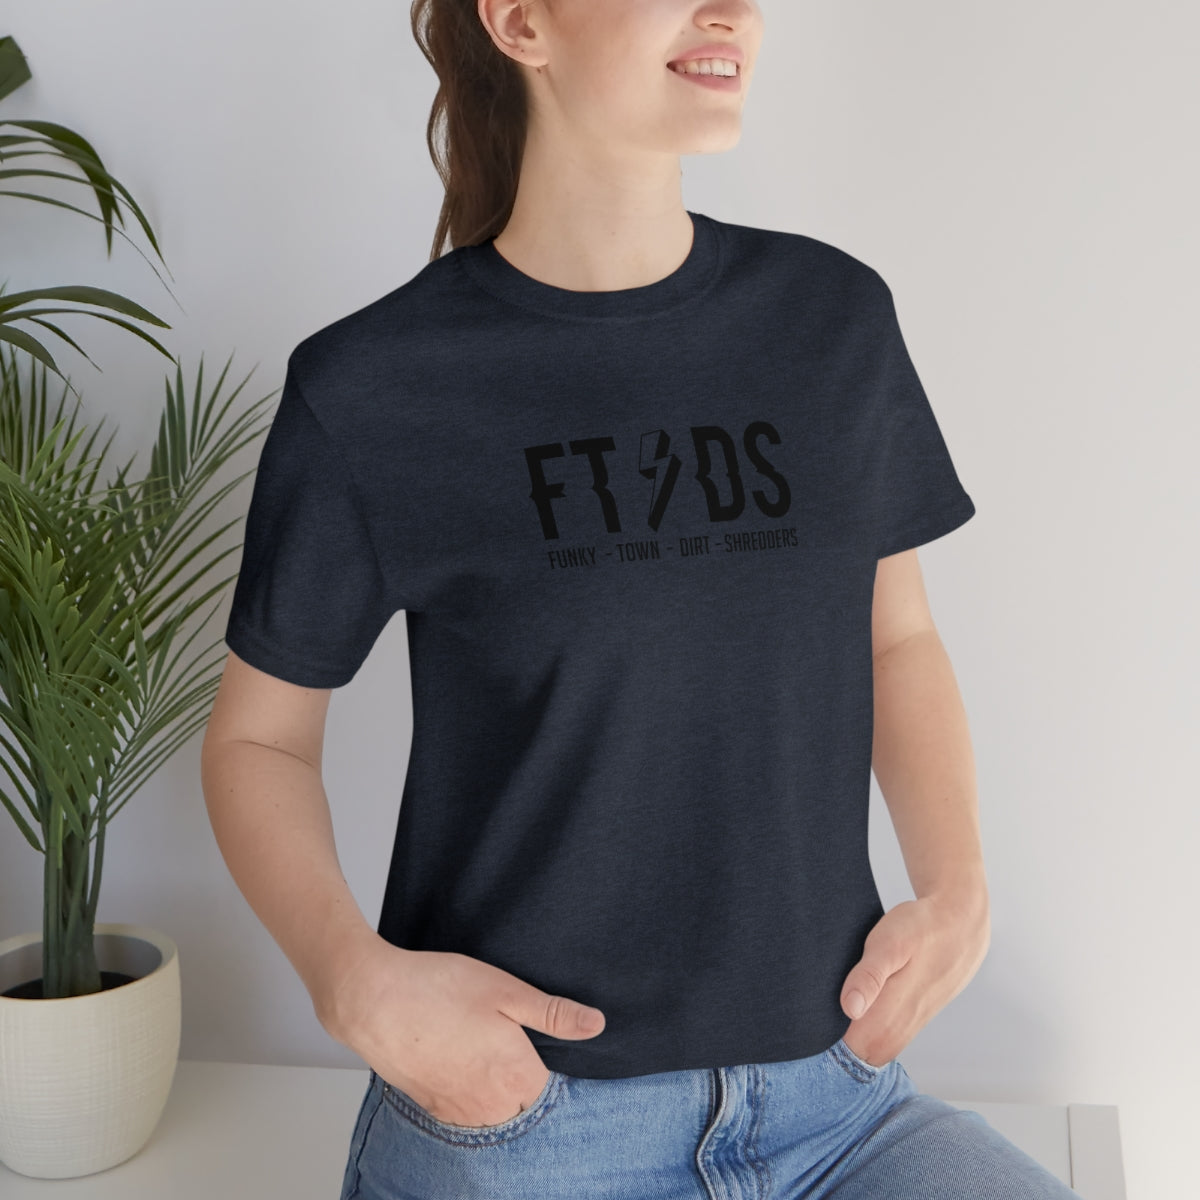 FTDS Party T-Shirt